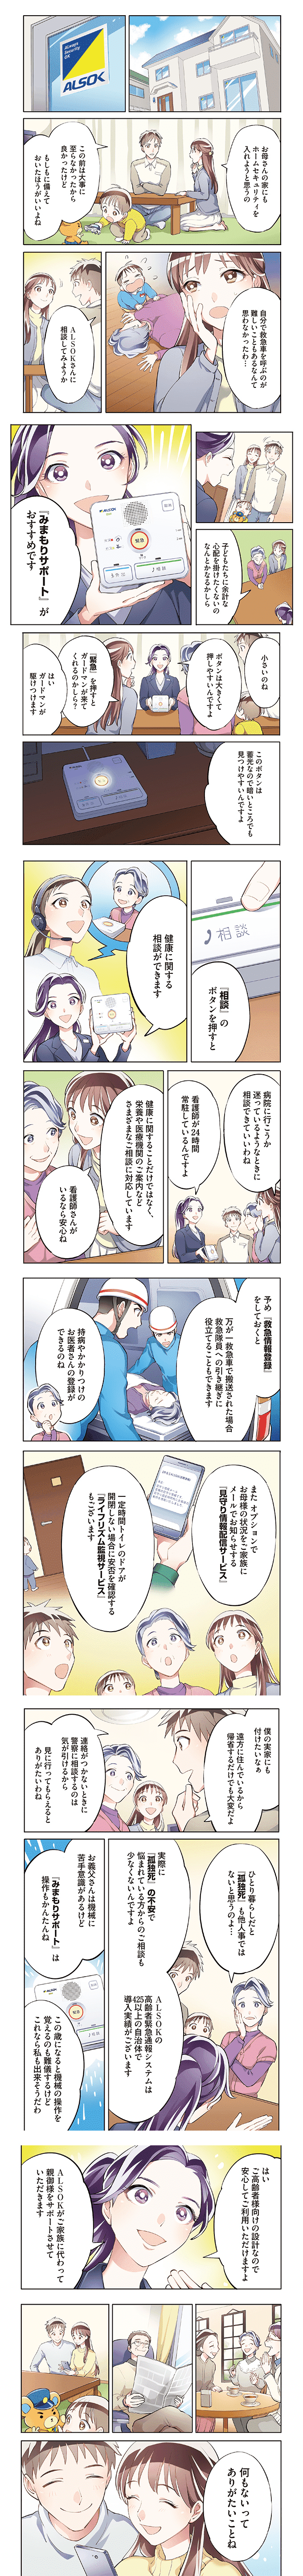 「HOME ALSOK みまもりサポート」利用イメージ漫画